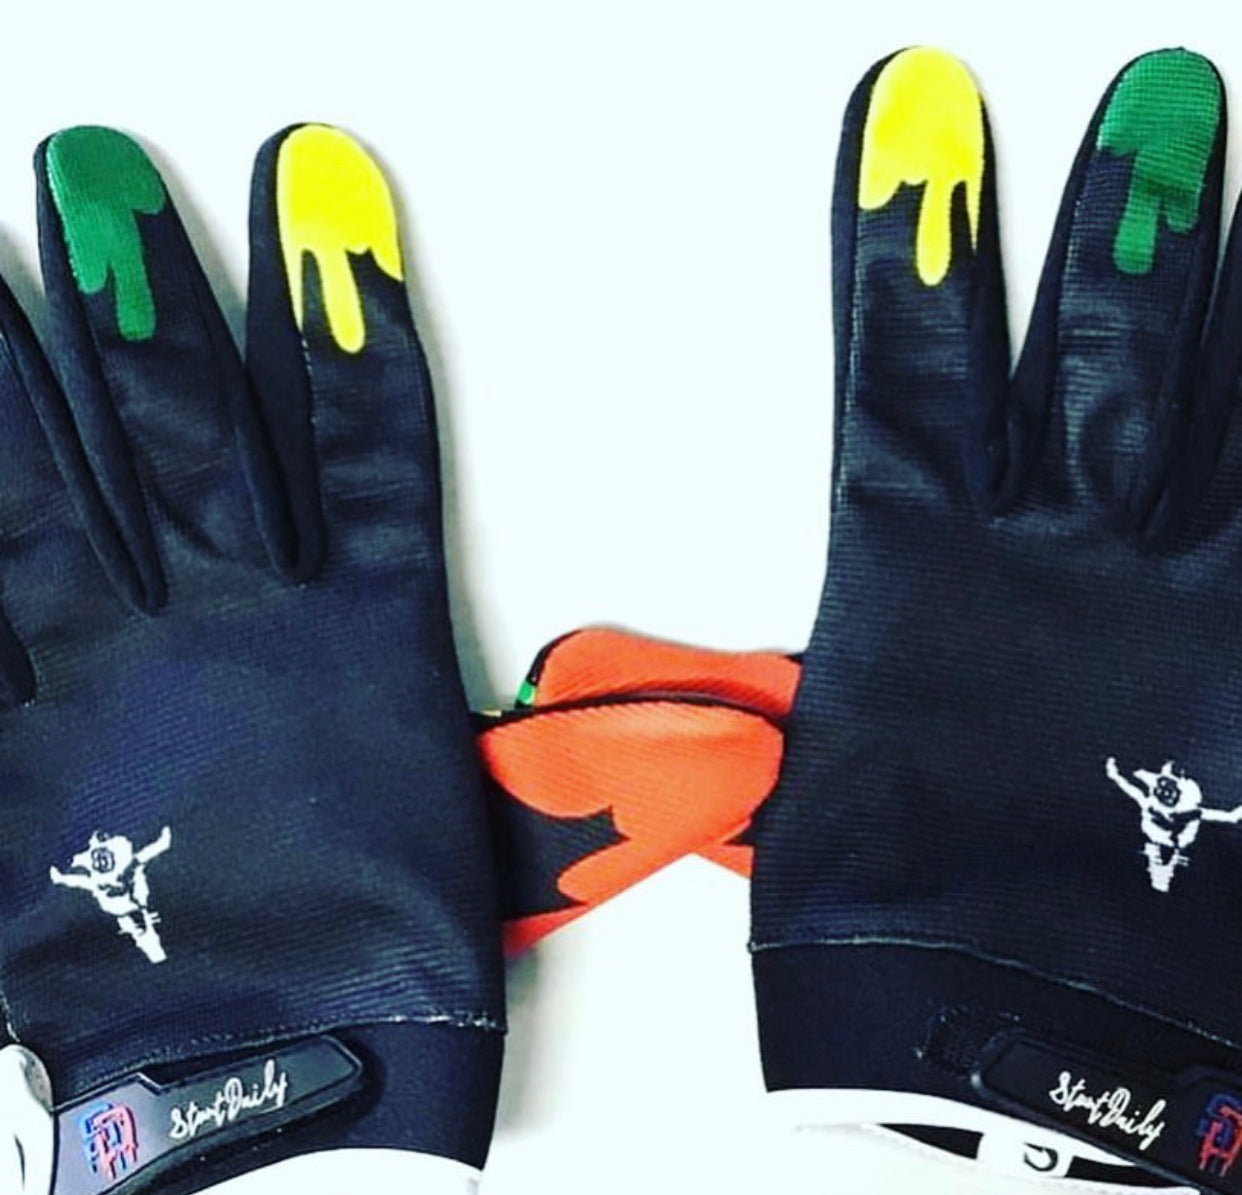 The Sic Shop x Stunt Daily Collab Gloves